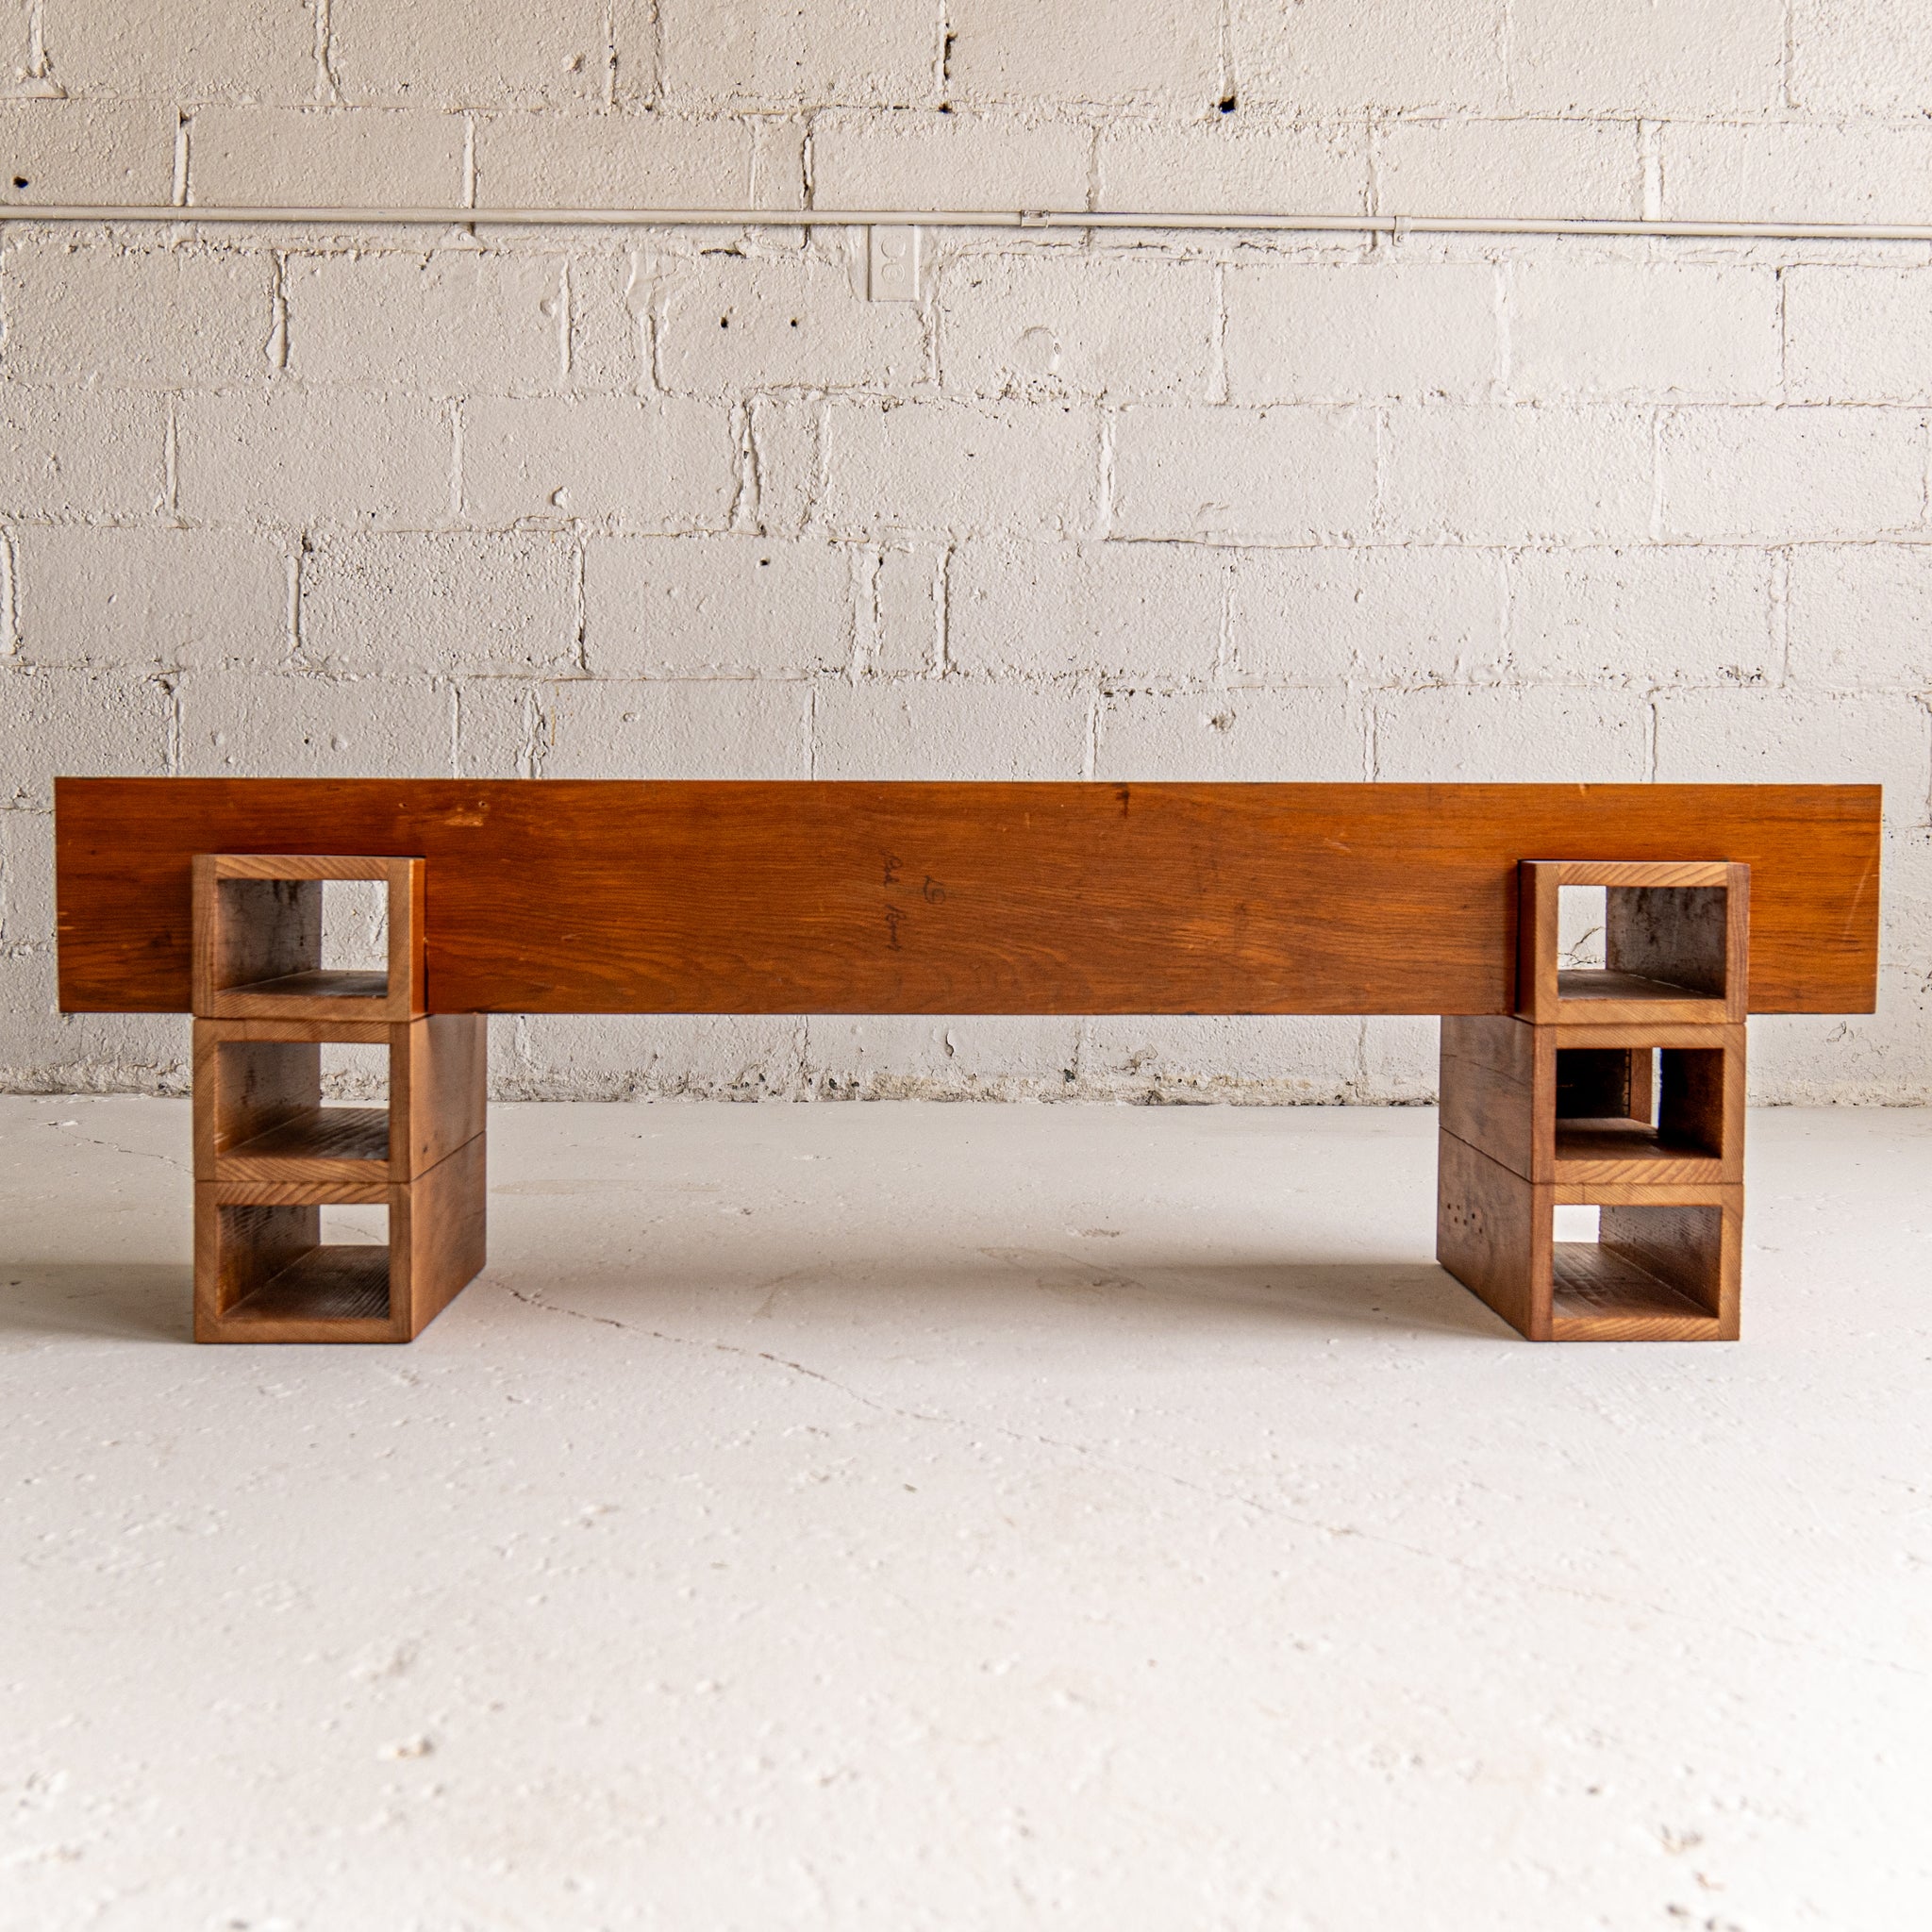 Pipe Organ Bench No. 3 | Reclaimed Wood